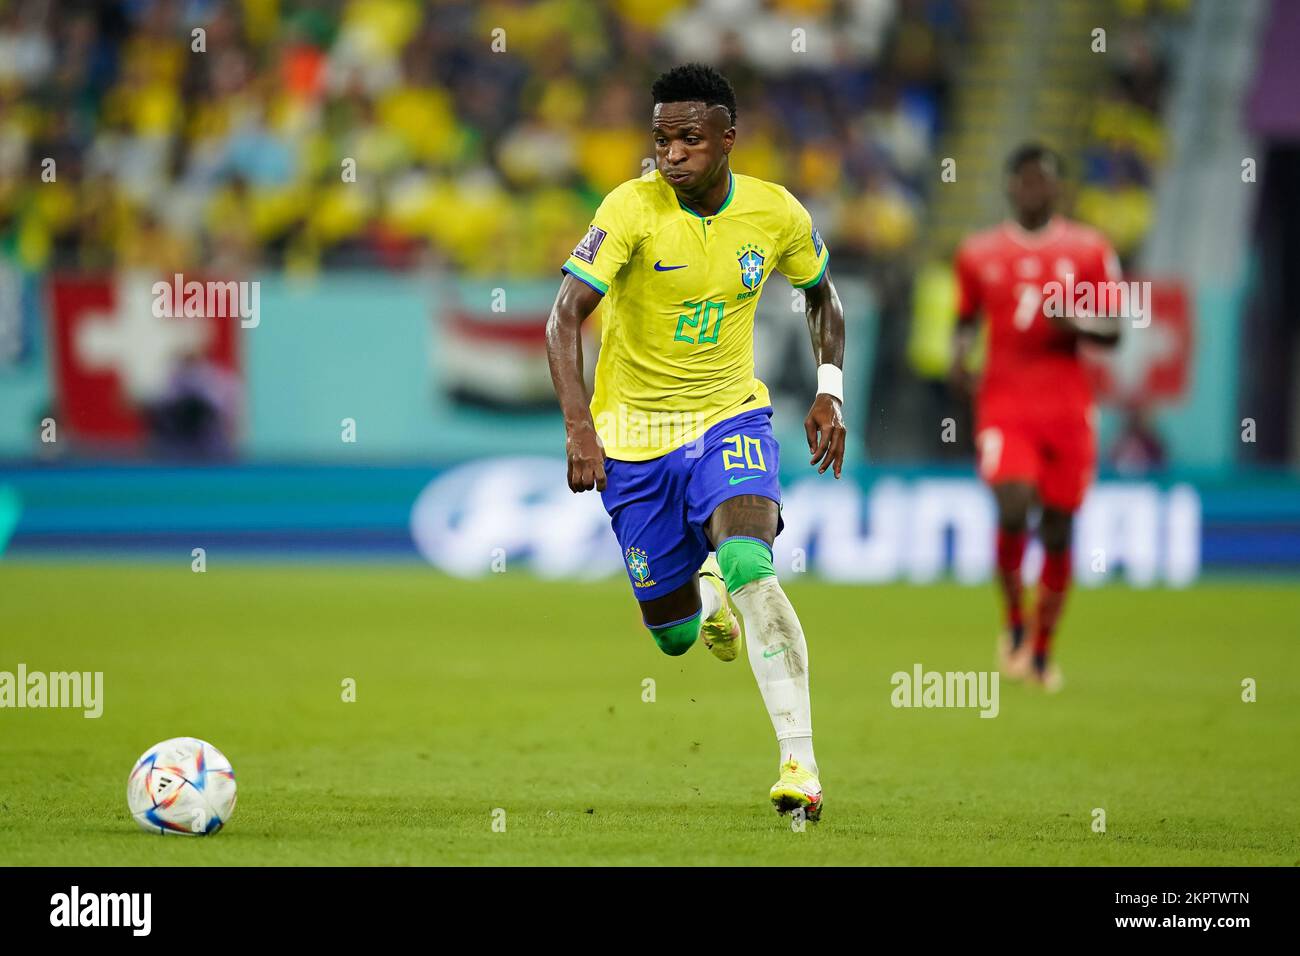 DOHA, QATAR - NOVEMBER 28: Player of Brazil Vinícius Júnior passes the ball during the FIFA World Cup Qatar 2022 group G match between Brazil and Switzerland at Stadium 974 on November 28, 2022 in Doha, Qatar. (Photo by Florencia Tan Jun/PxImages) Stock Photo